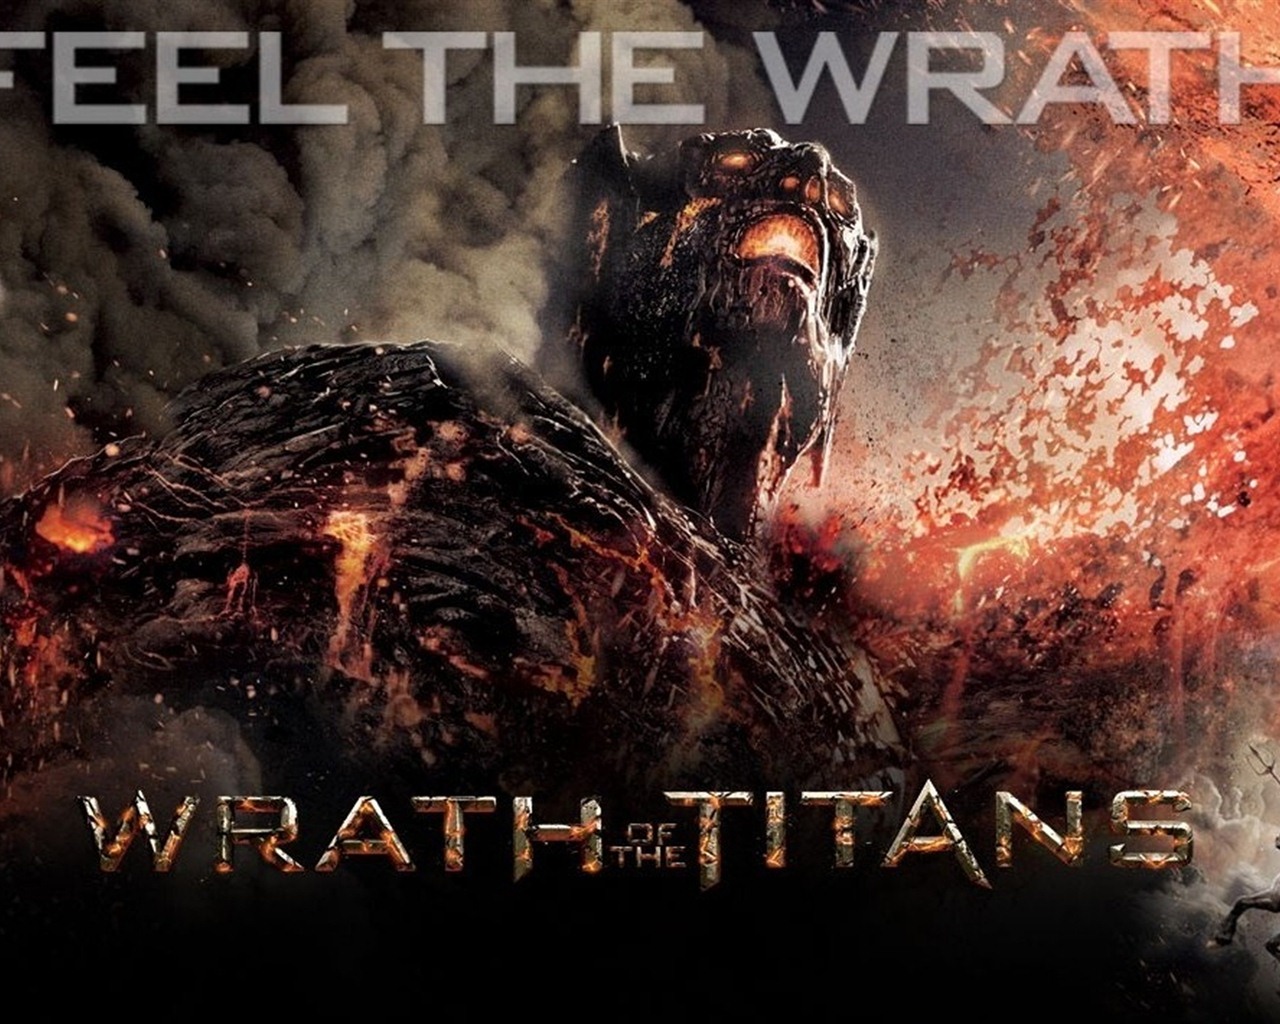 Wrath of the Titans HD Wallpapers #9 - 1280x1024